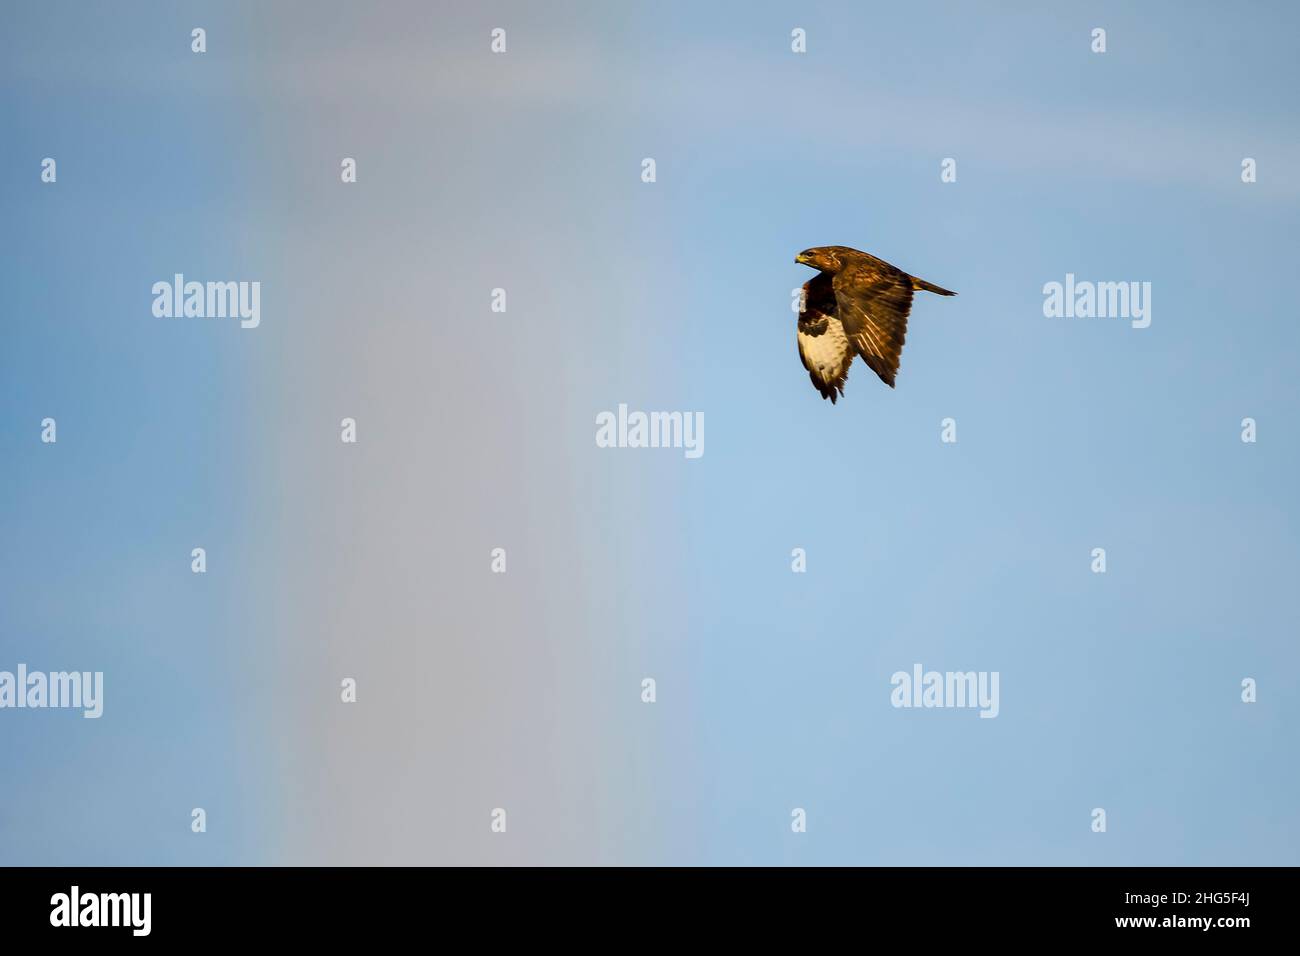 The buzzard, is a species of accipitriforme bird in the Accipitridae family. Stock Photo